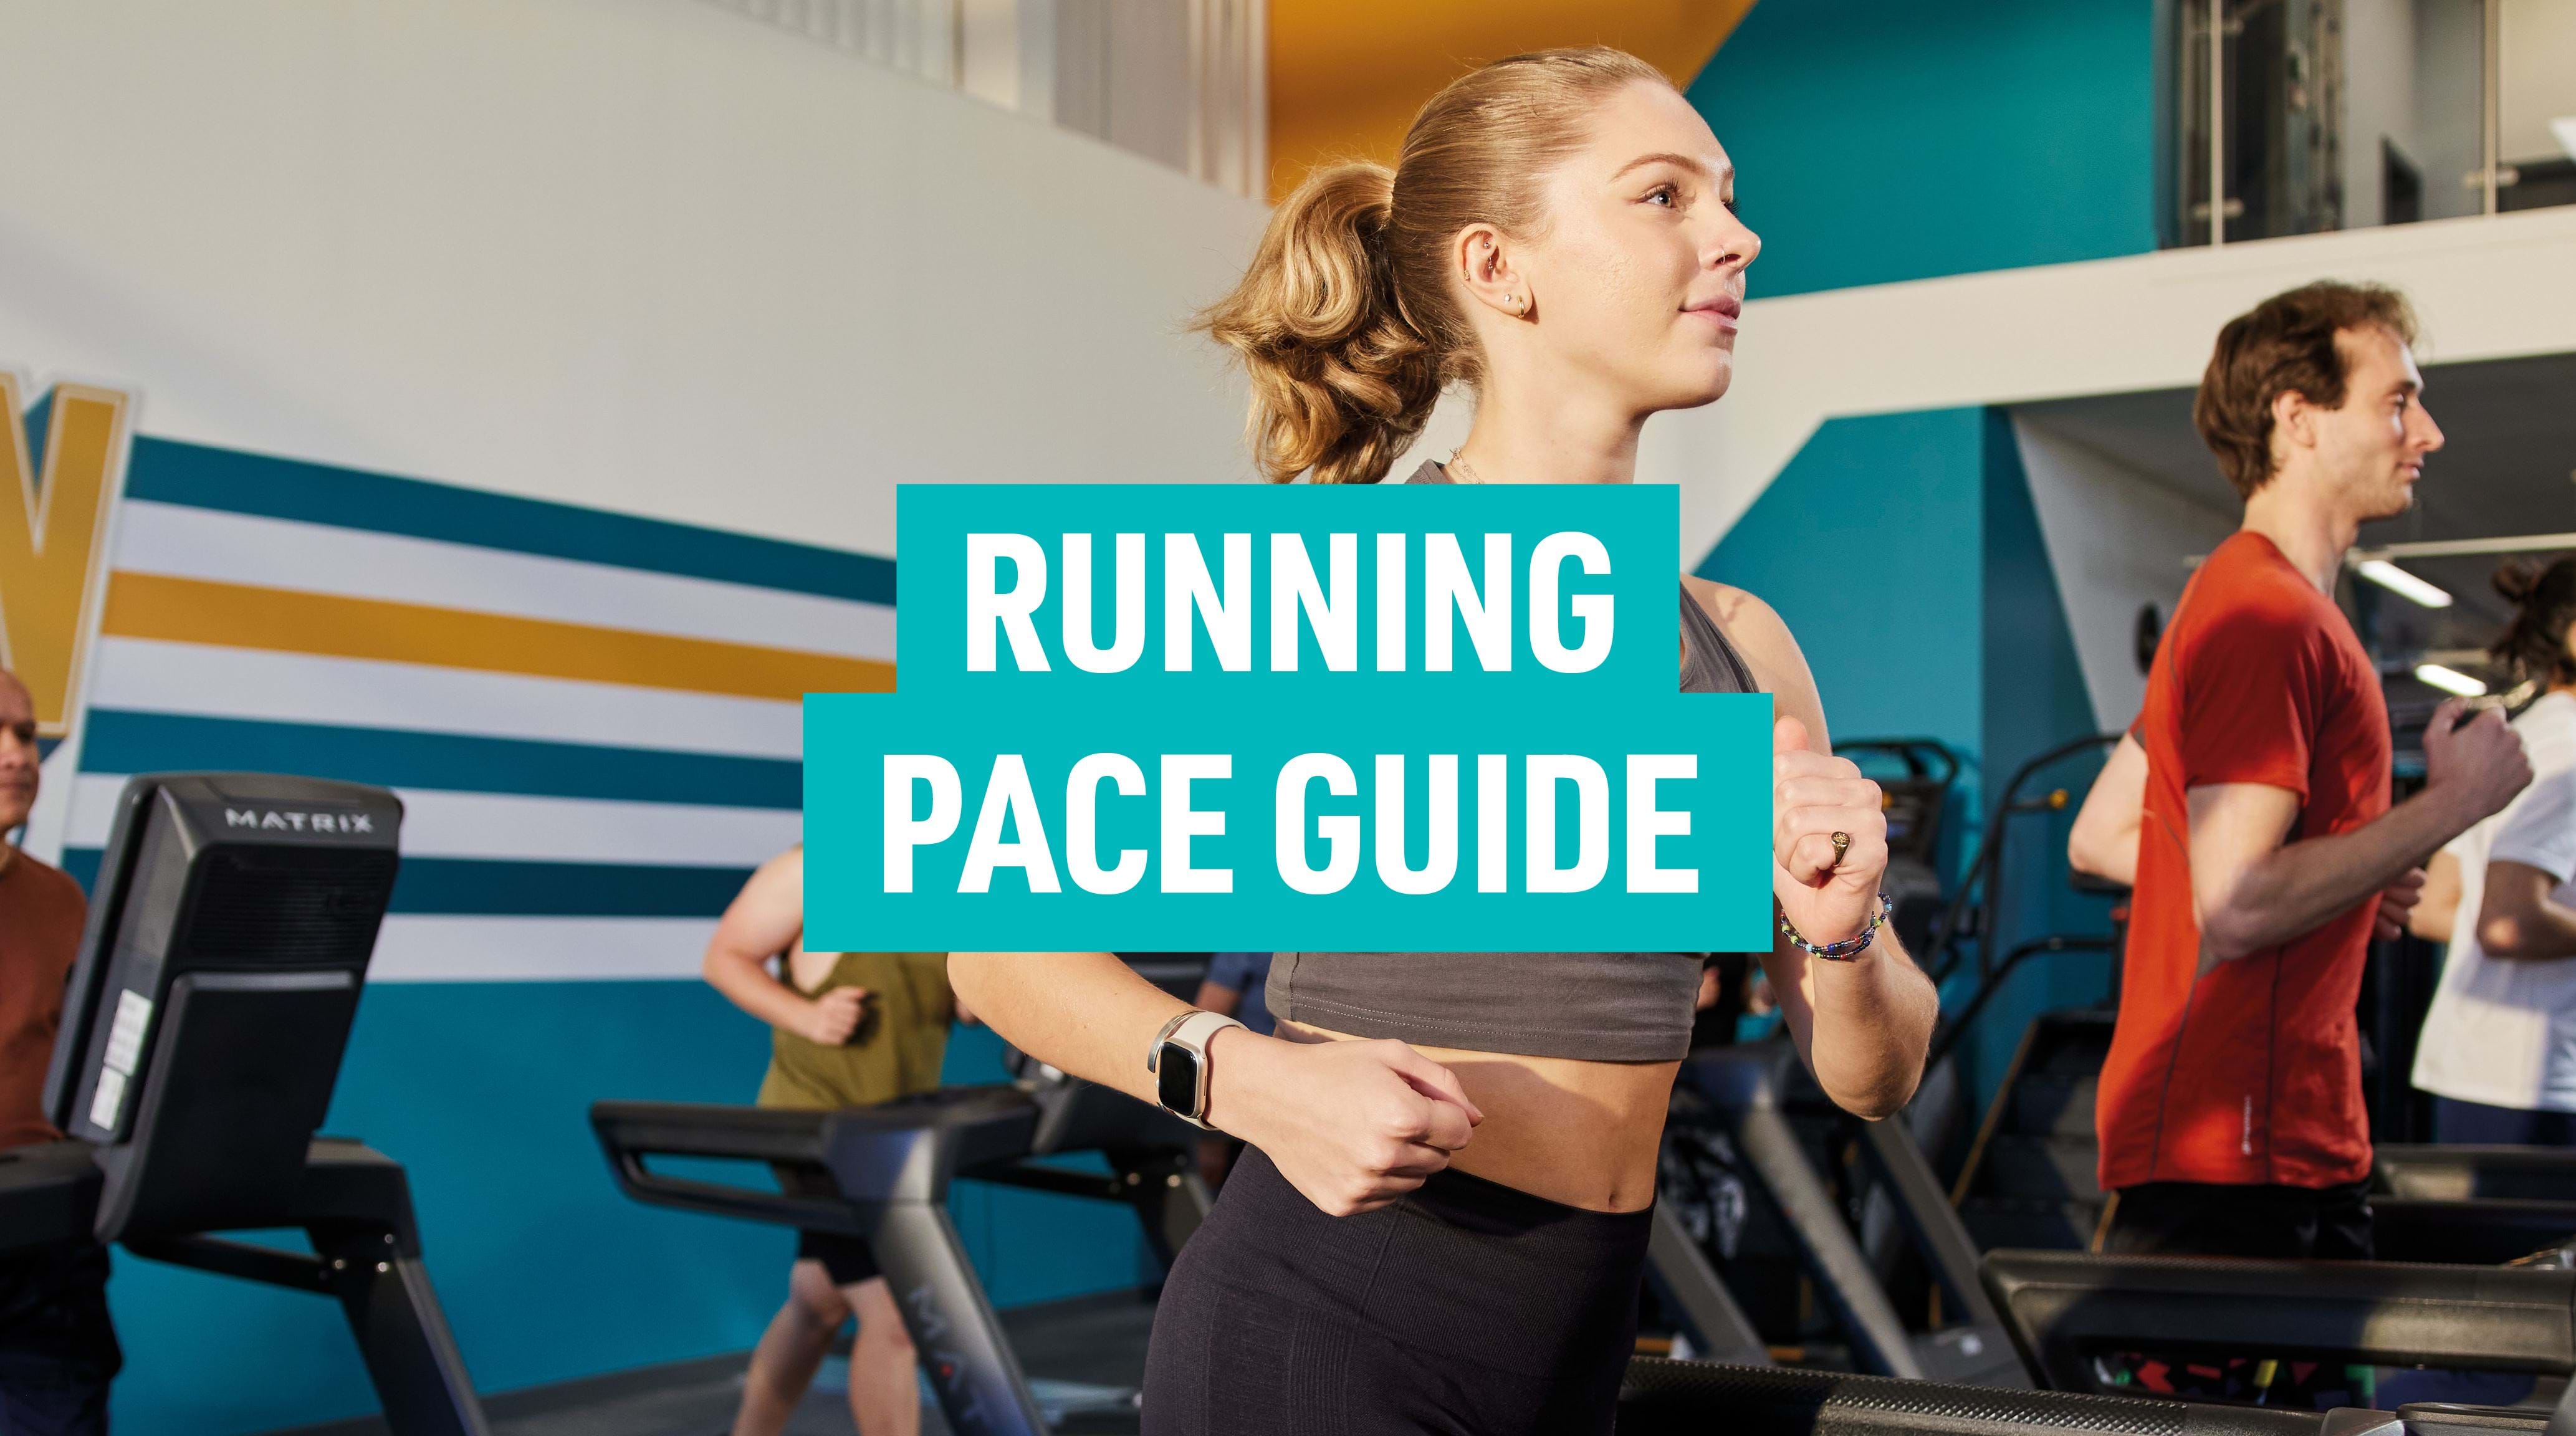 Running Pace Calculator: Find Your Best Pace Easily